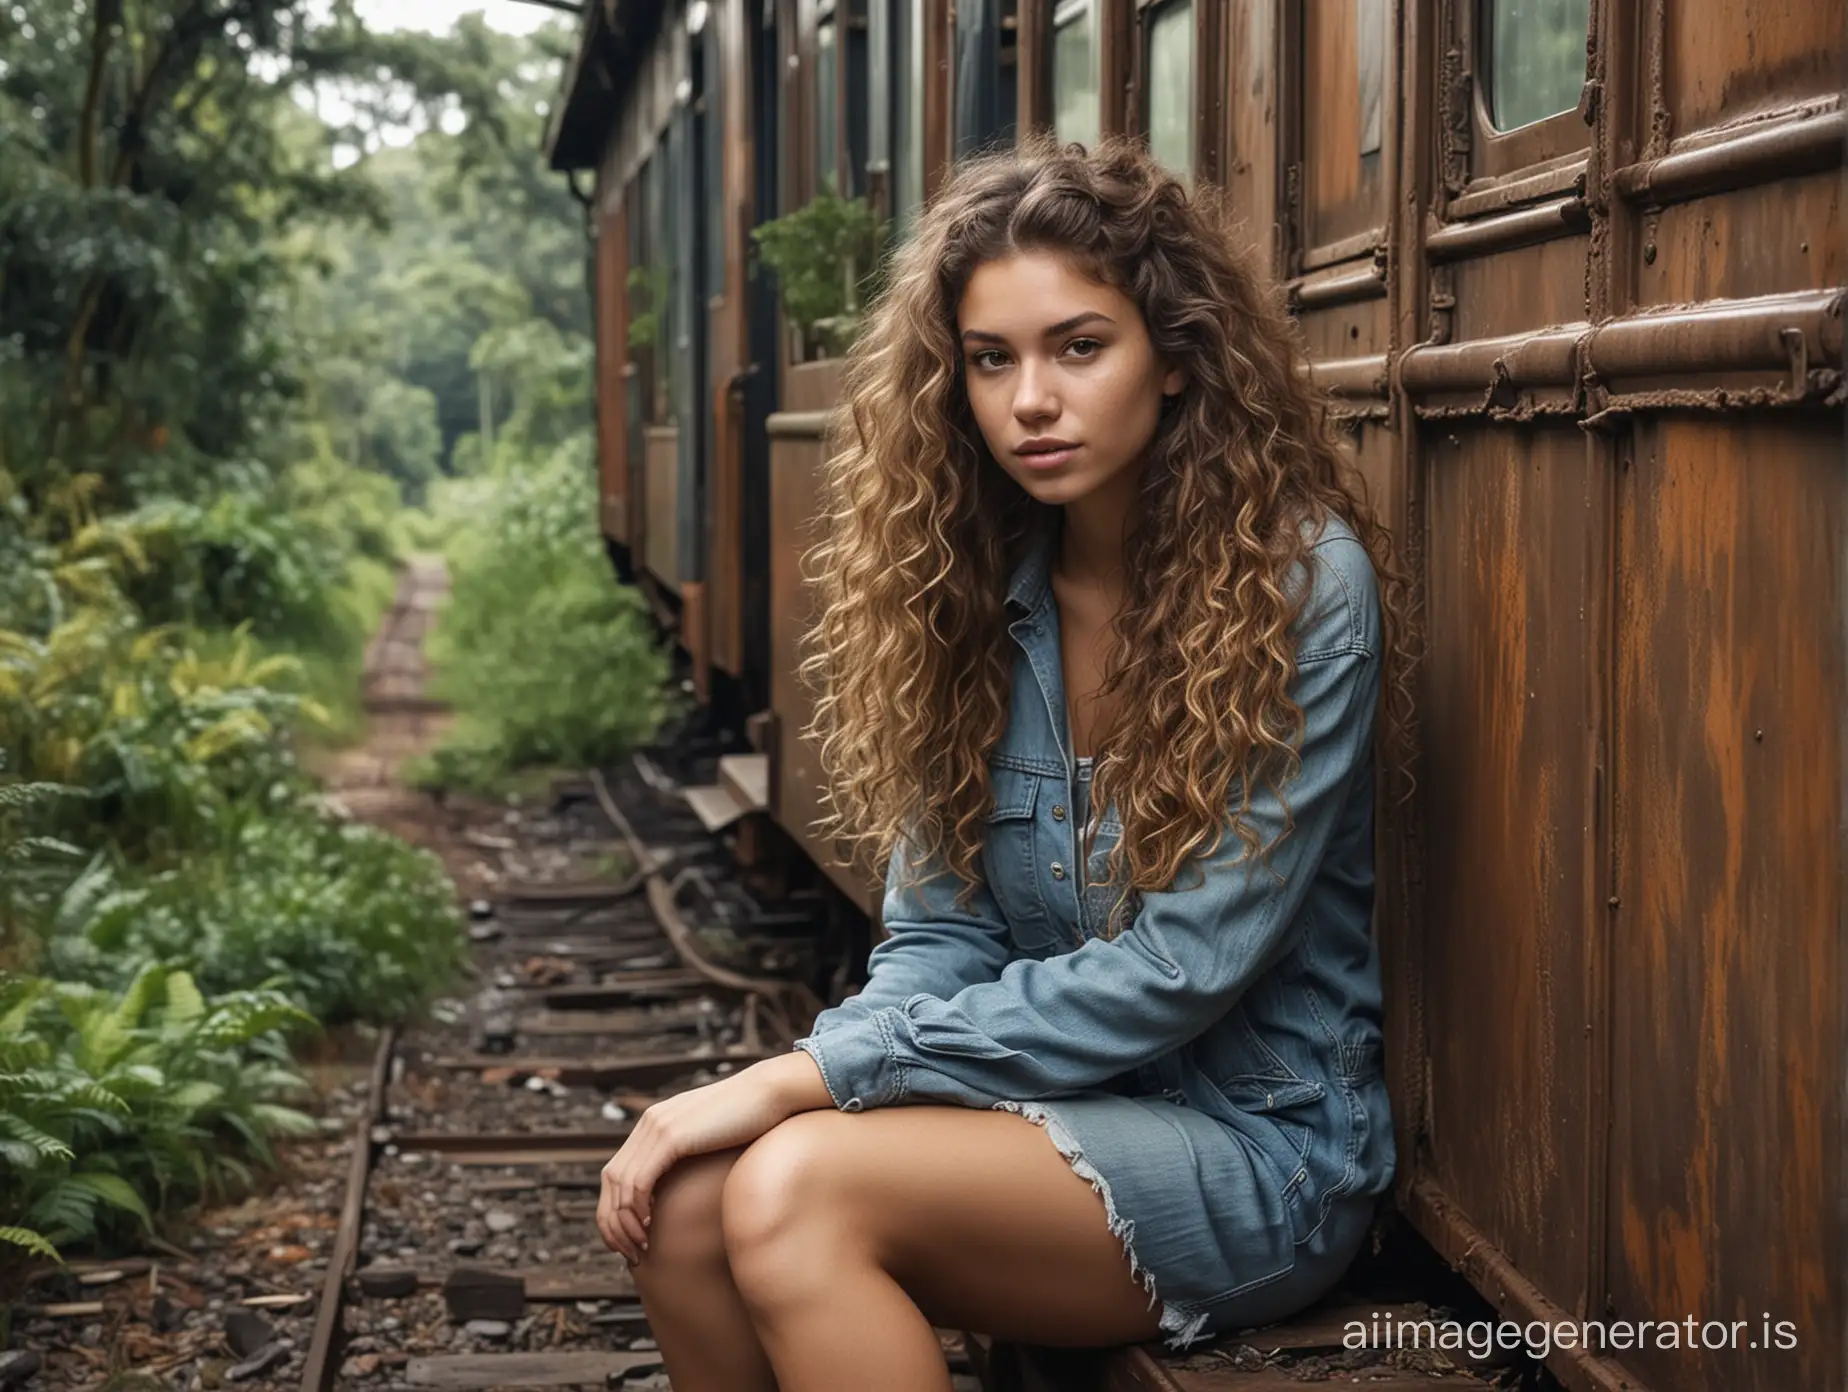 Beautiful-Girl-with-Curly-Hair-Sitting-in-Abandoned-Train-Carriage